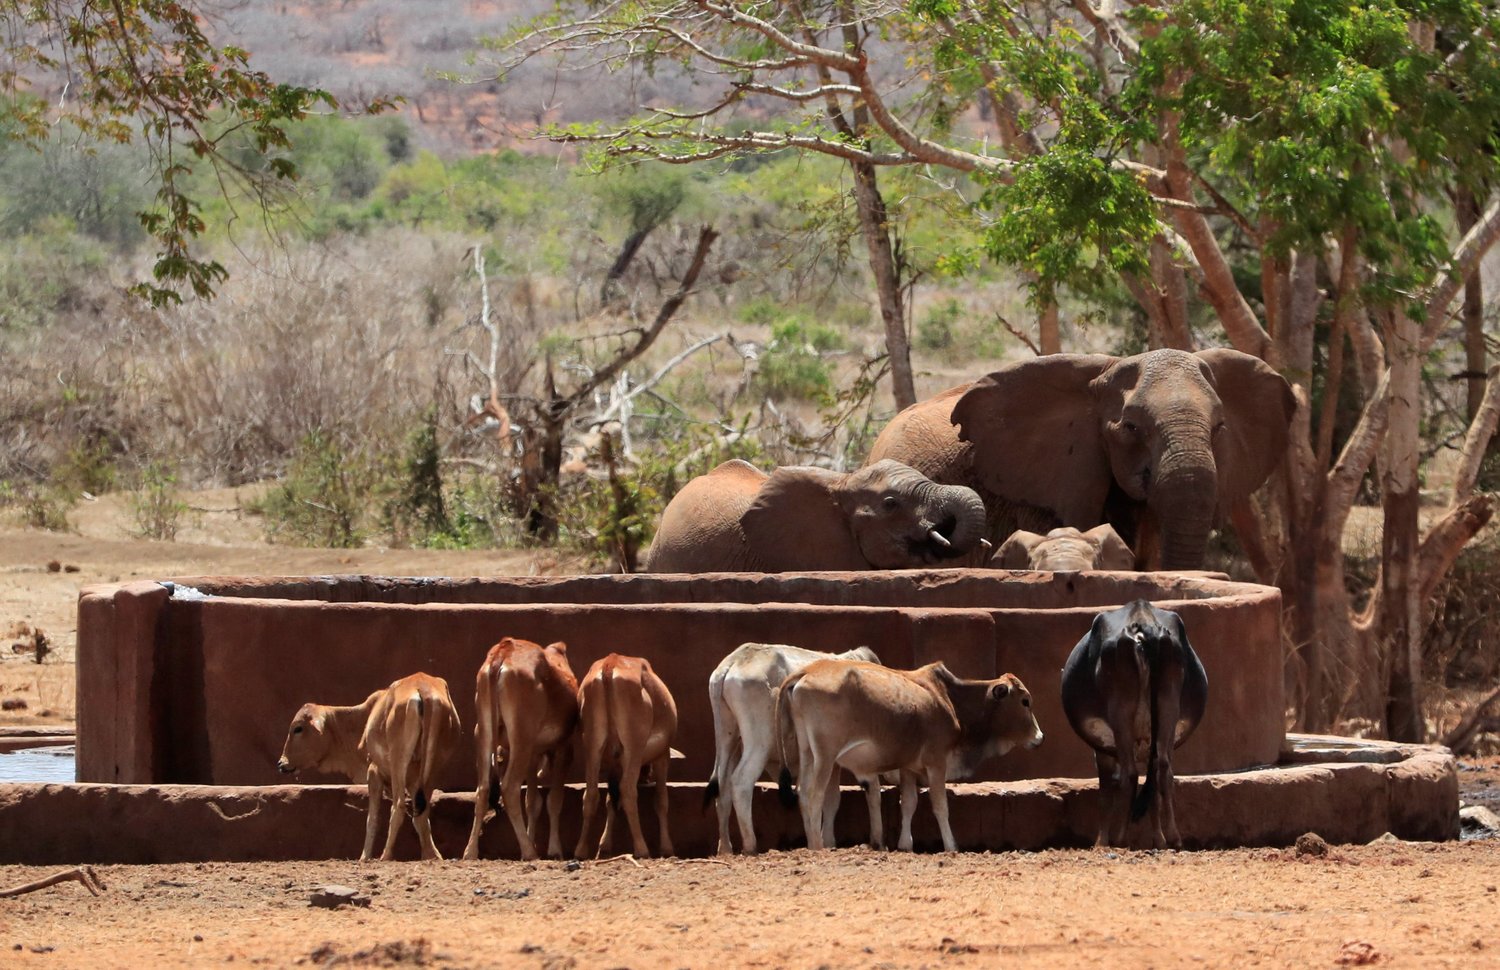 Elephants and cattle affected by the worsening drought due to climate change impacted failed rain seasons, share water at a solar-powered water point in the Mgeno conservancy in Taita Taveta, Kenya Nov. 8.